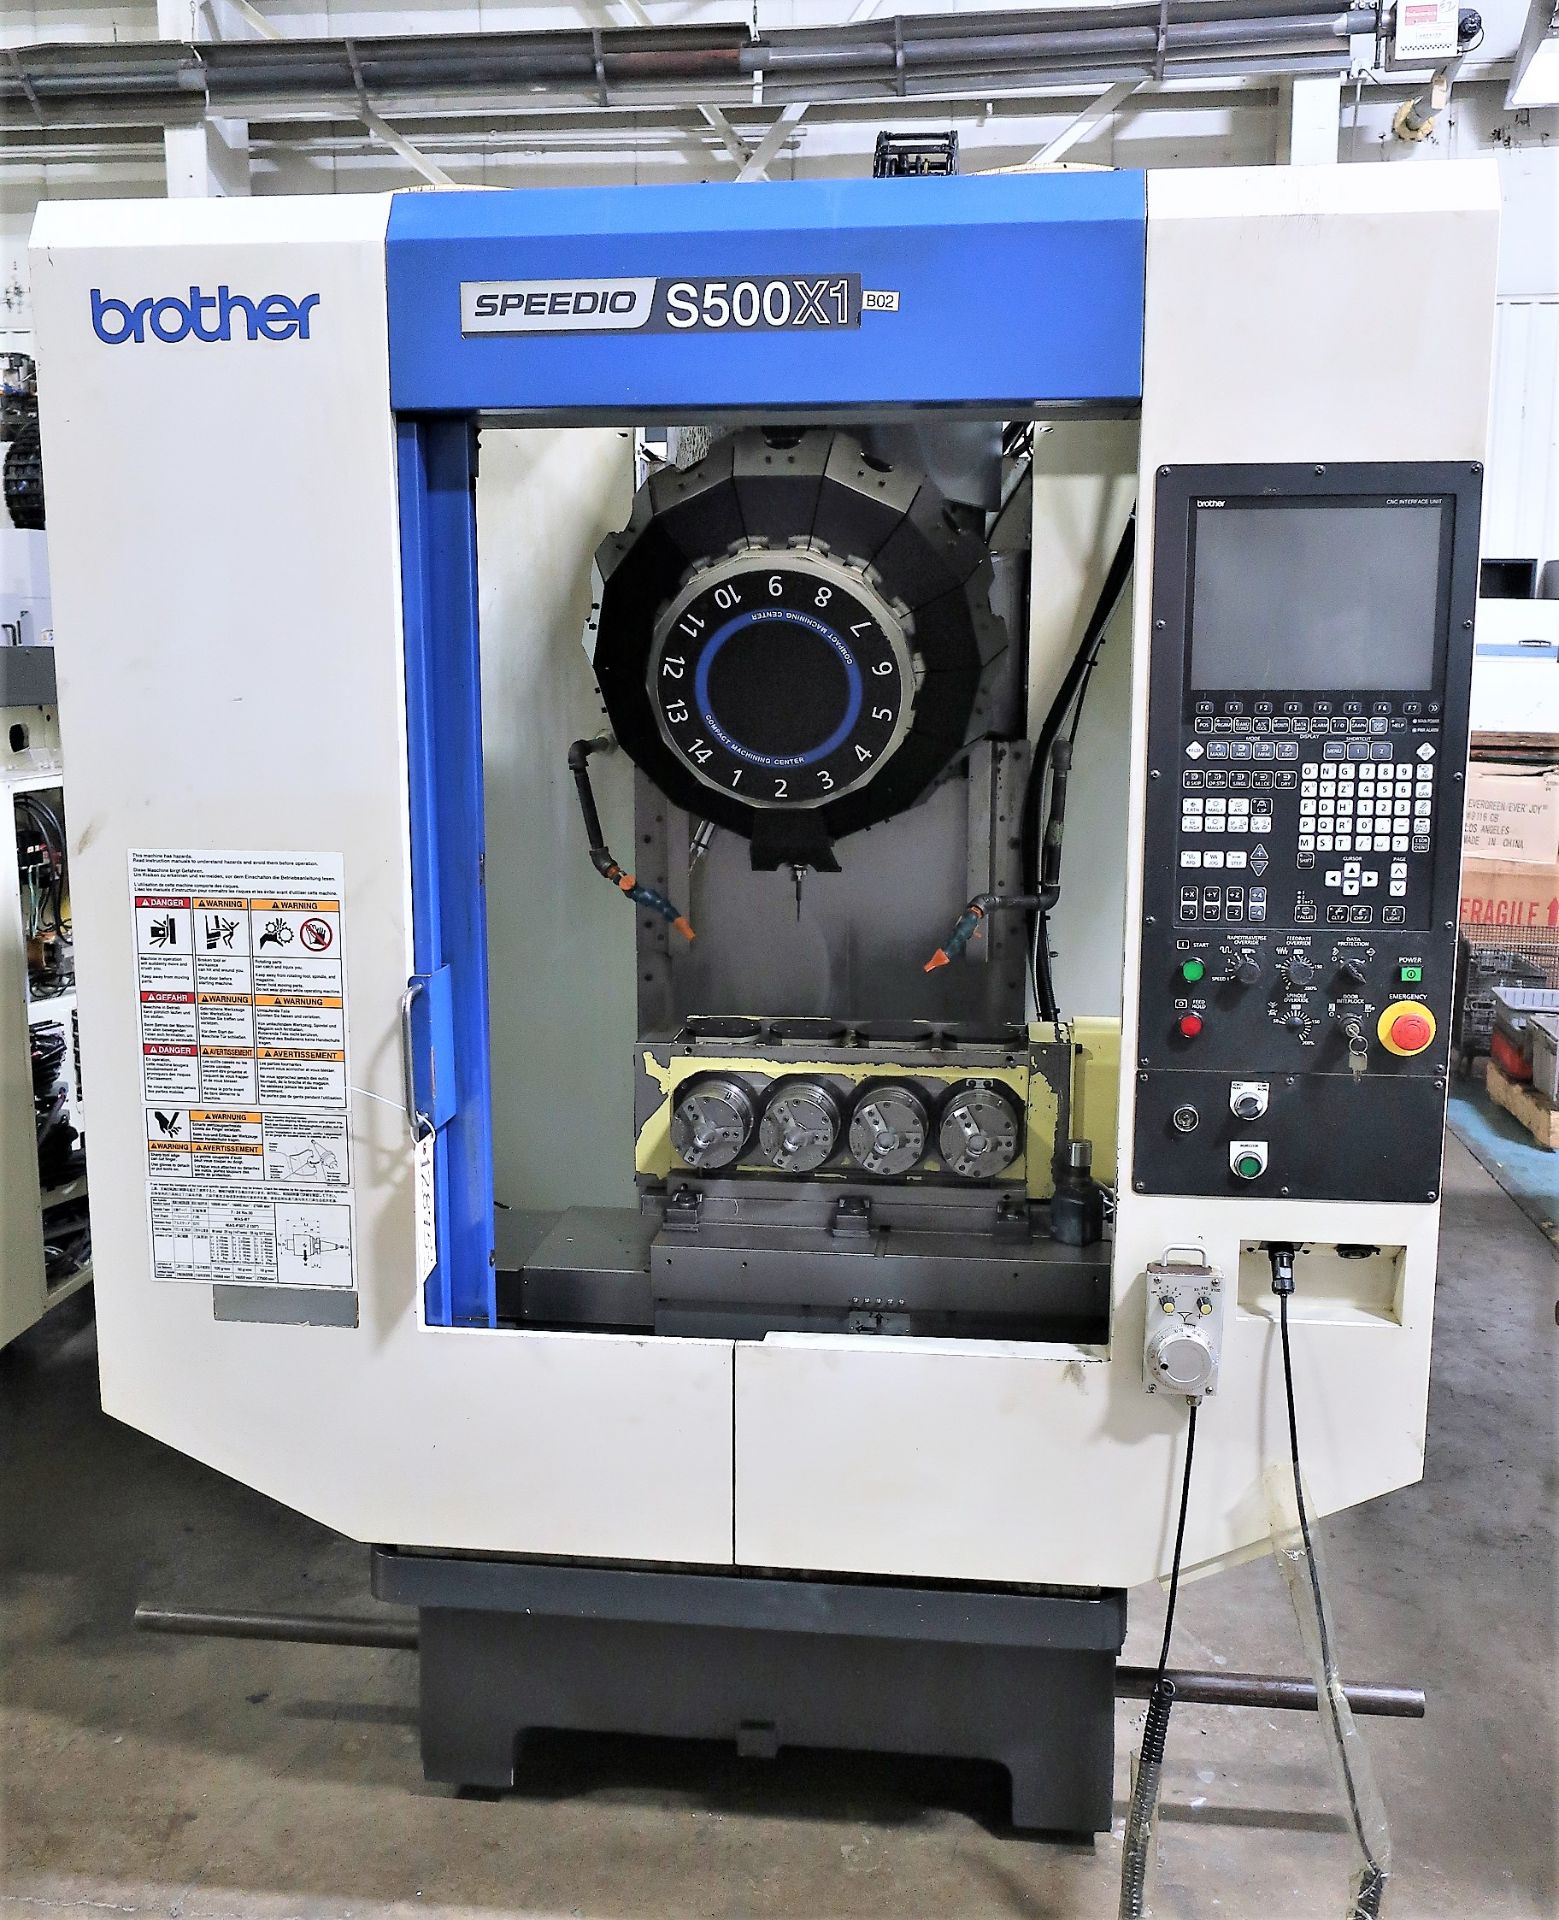 2014 BROTHER SPEEDIO S5000X1 4-AXIS CNC DRILL TAP CENTER, S/N 117233